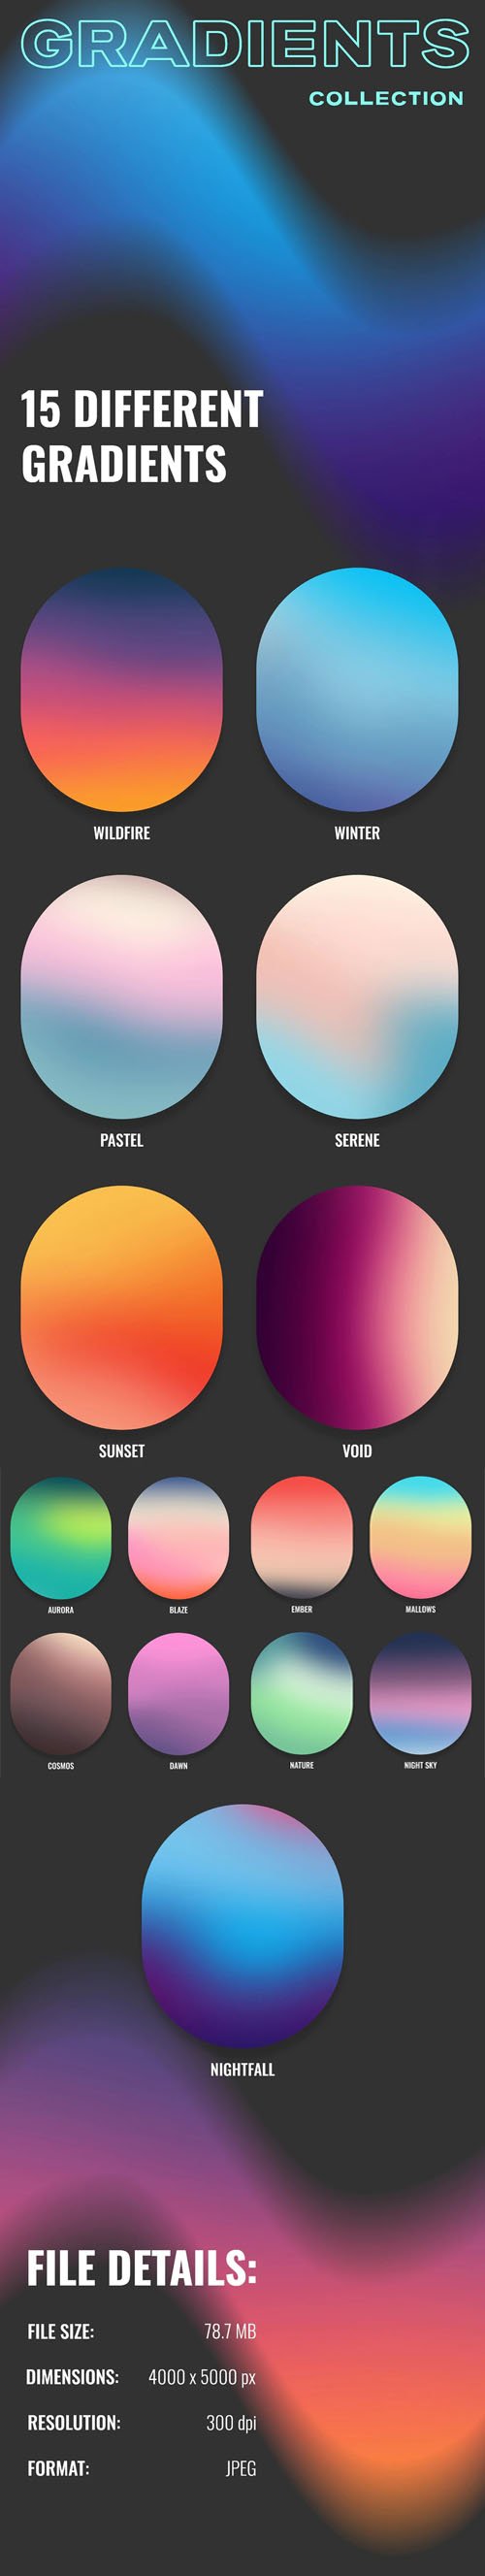 15 Different Gradients Pack